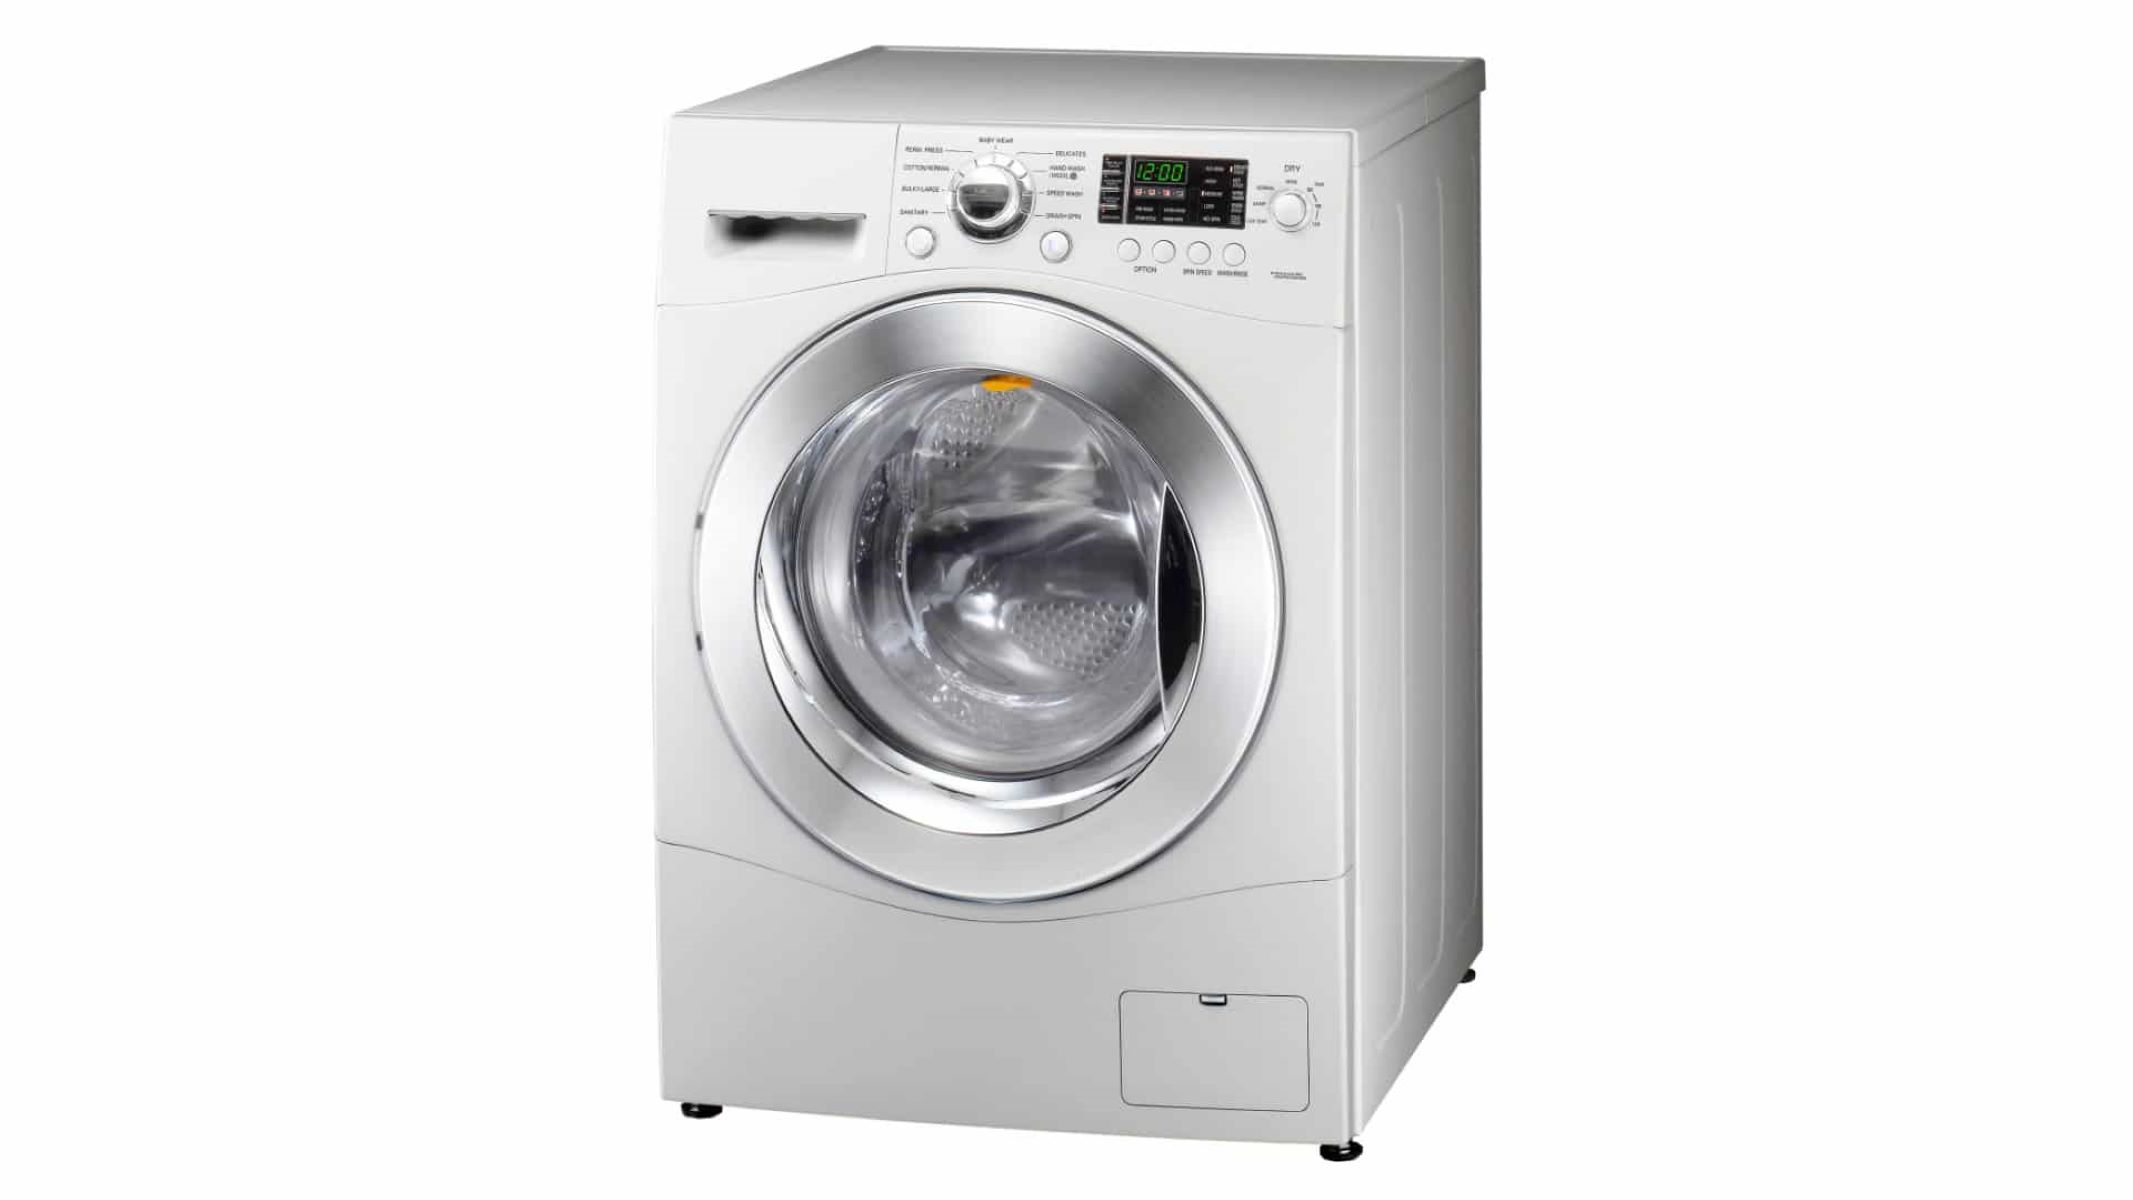 How To Fix The Error Code F66 For Whirlpool Dryer